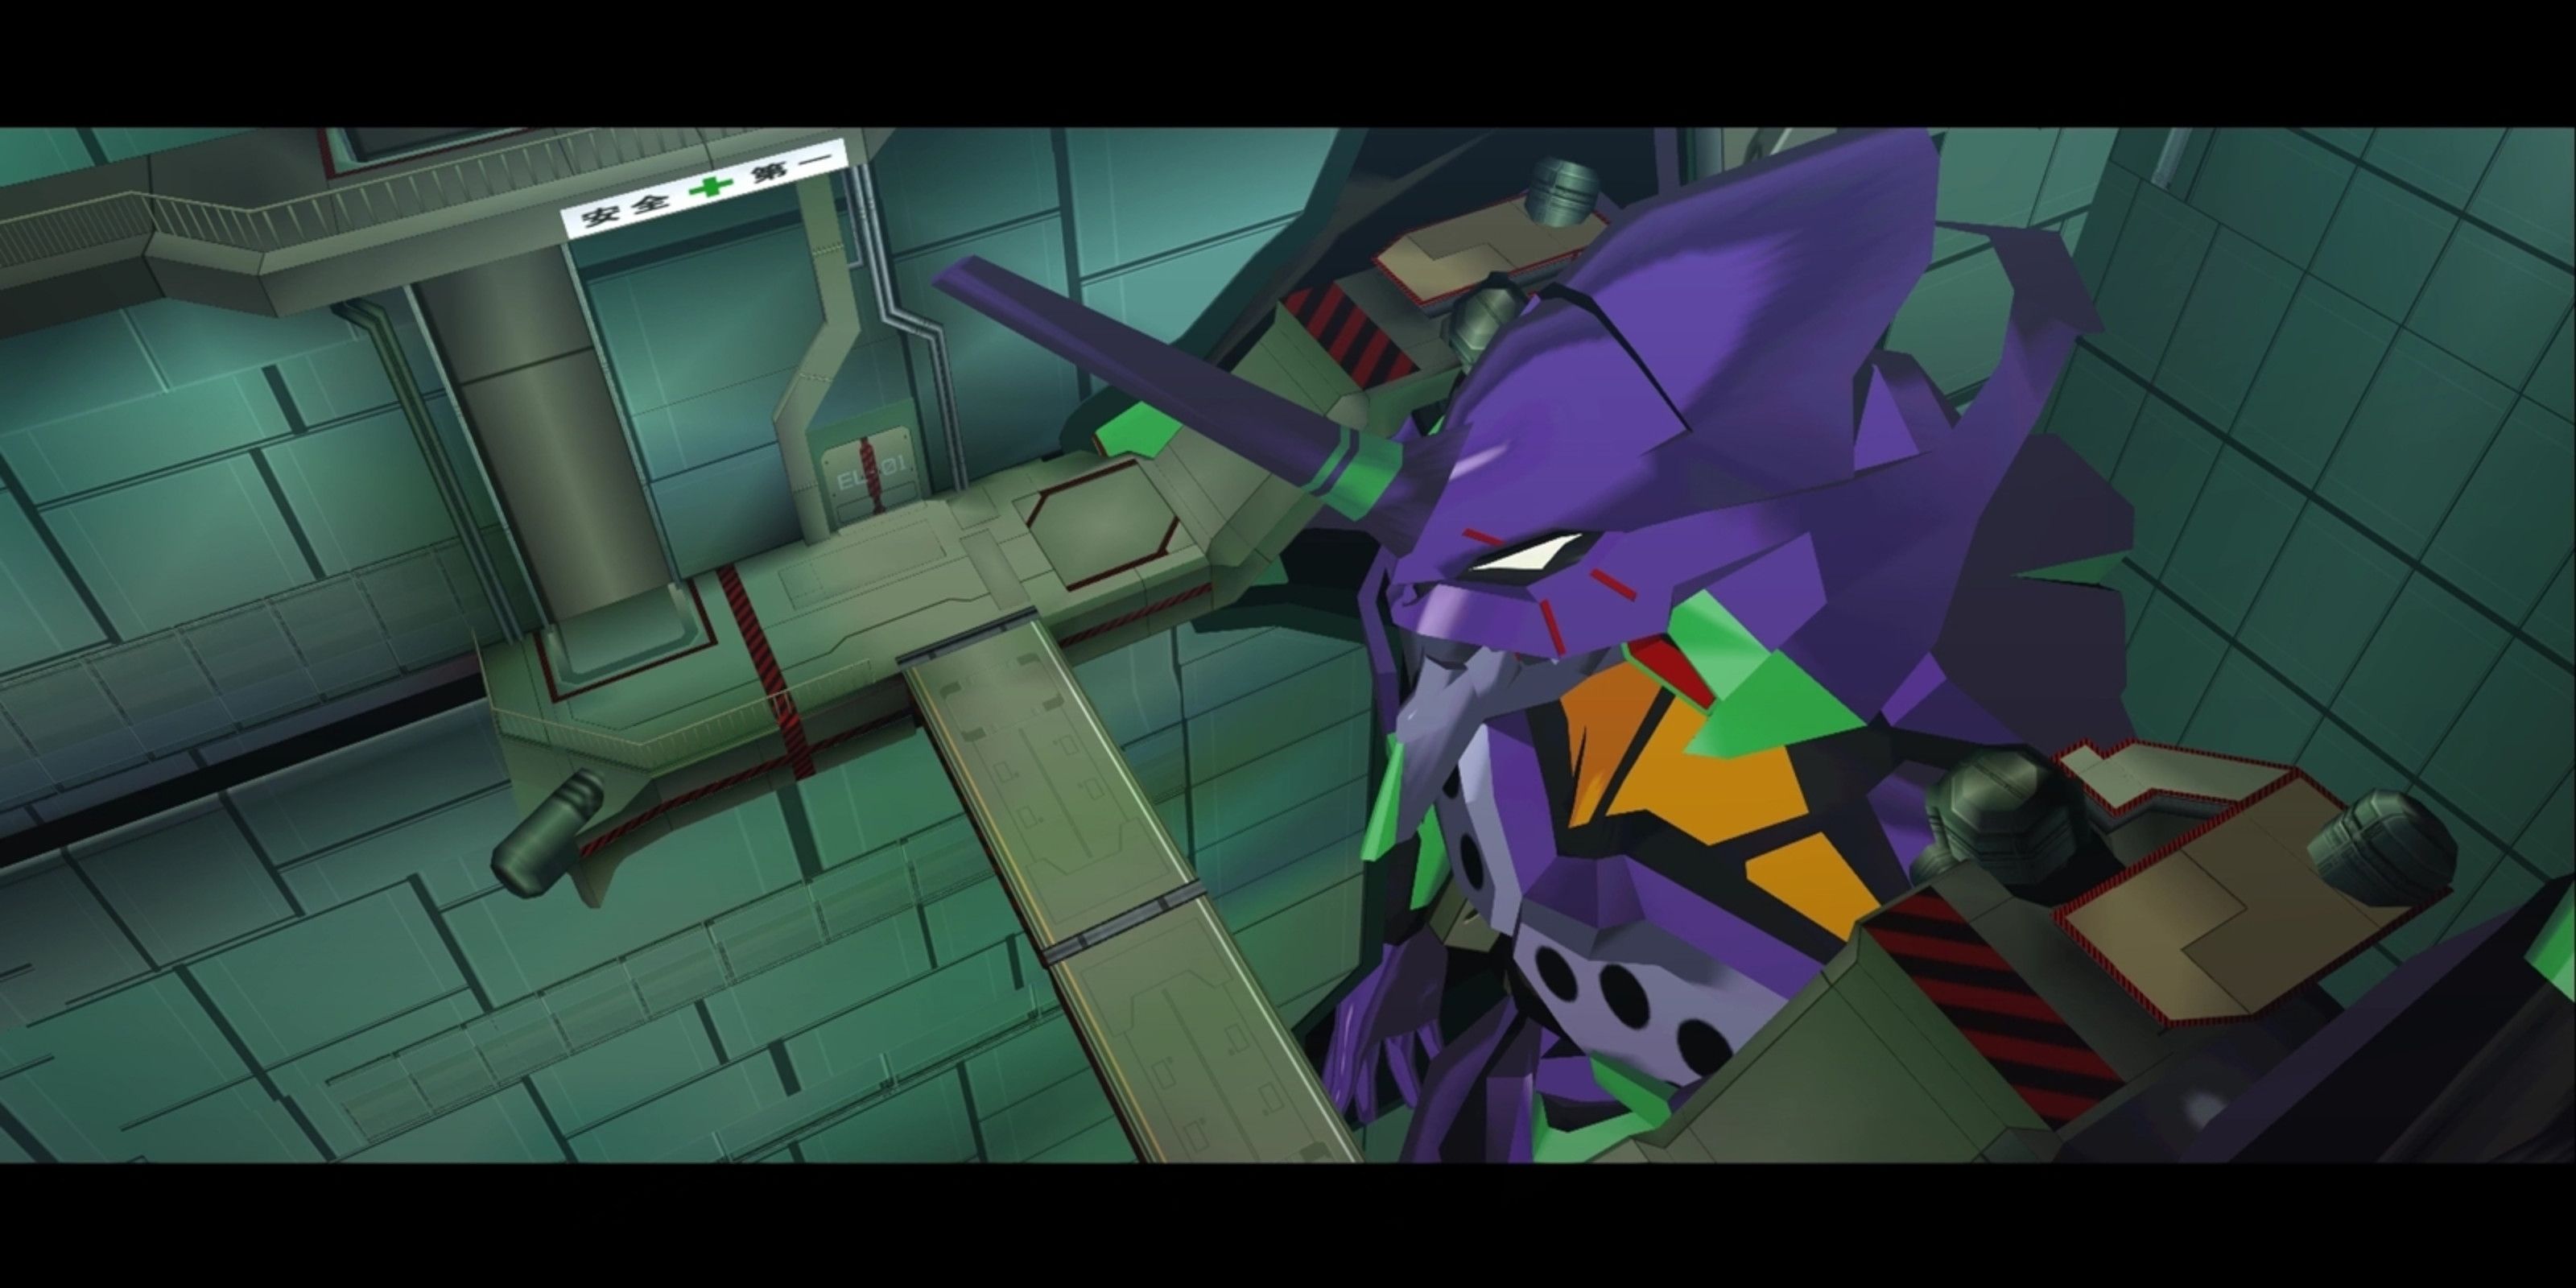 Shoot of Eva Unit 01 in 3D style of game